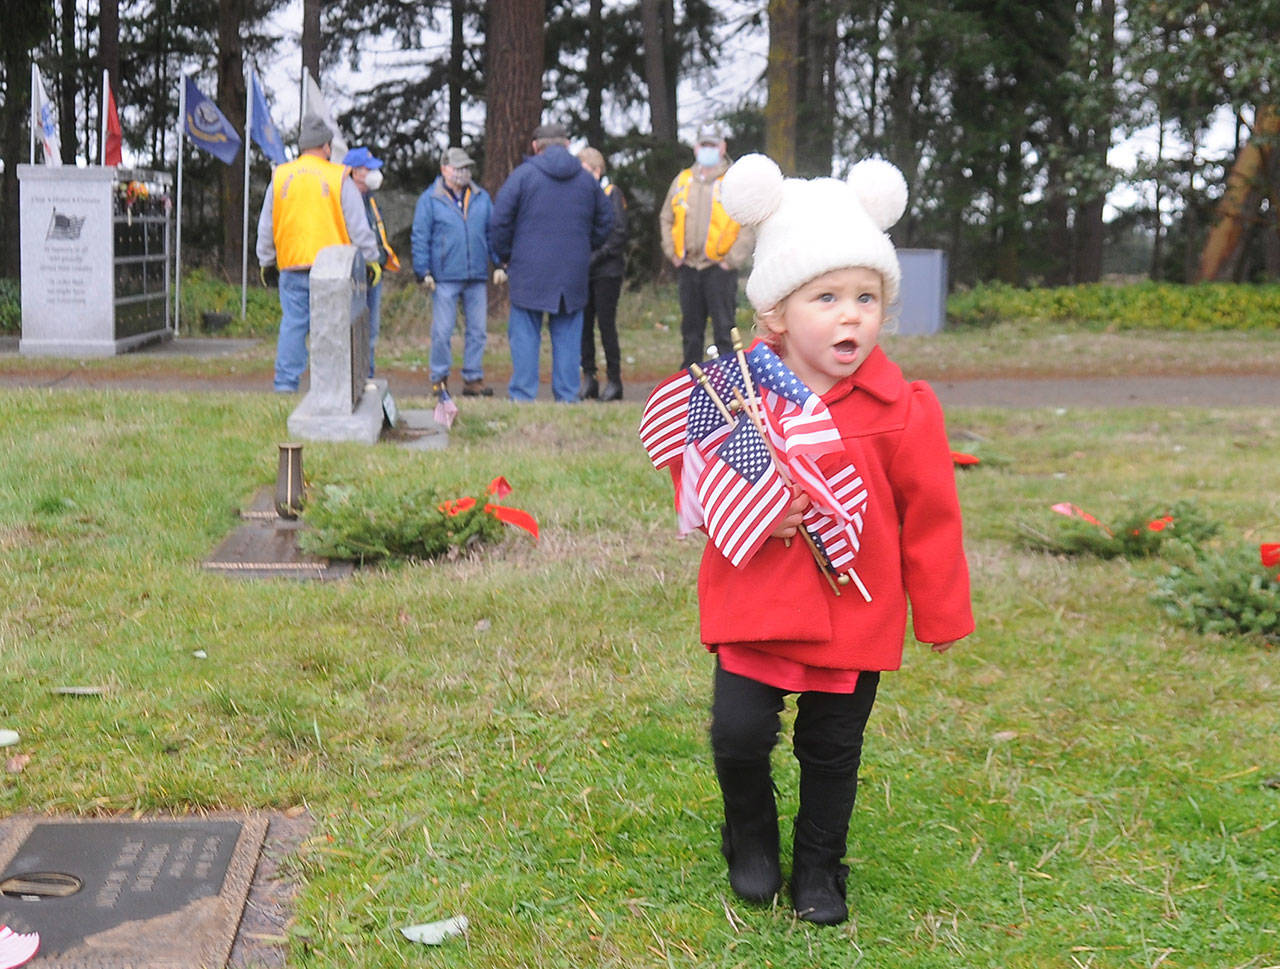 Adelyn Tordini, 19 months, of Whidbey Island, enjoys collecting tiny American flags at the Sequim View Cemetery following the Wreaths Across America event in December 2020. Tordini is the granddaughter of Judy Tordini, one of the event's organizers and co-chair of DAR's new Junior American Citizen club. Sequim Gazette file photo by Michael Dashiell